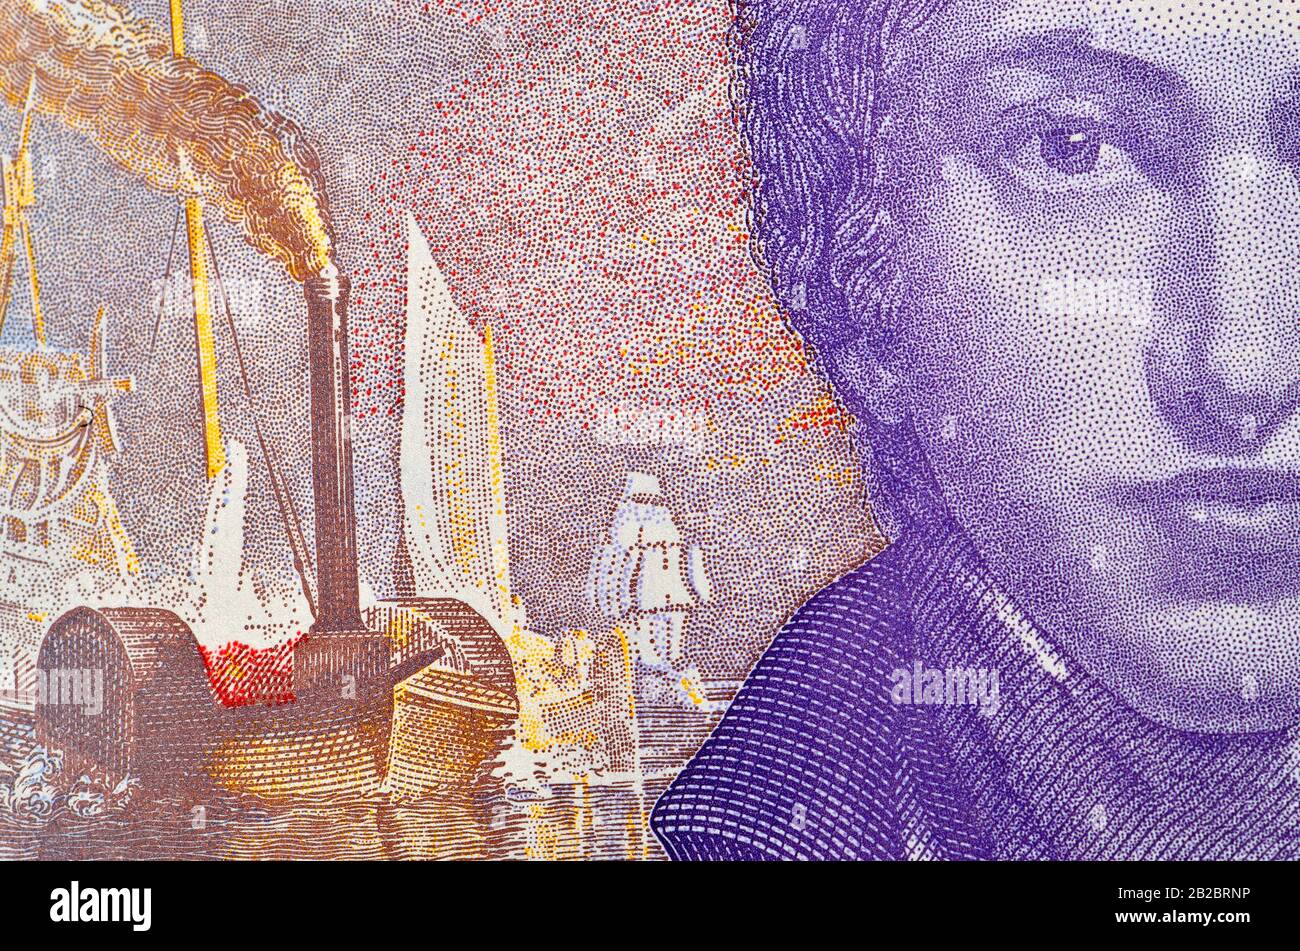 New British polymer £20 note (Feb 2020) JMW Turner’s self-portrait (c1799) and detail from The Fighting Temeraire Stock Photo